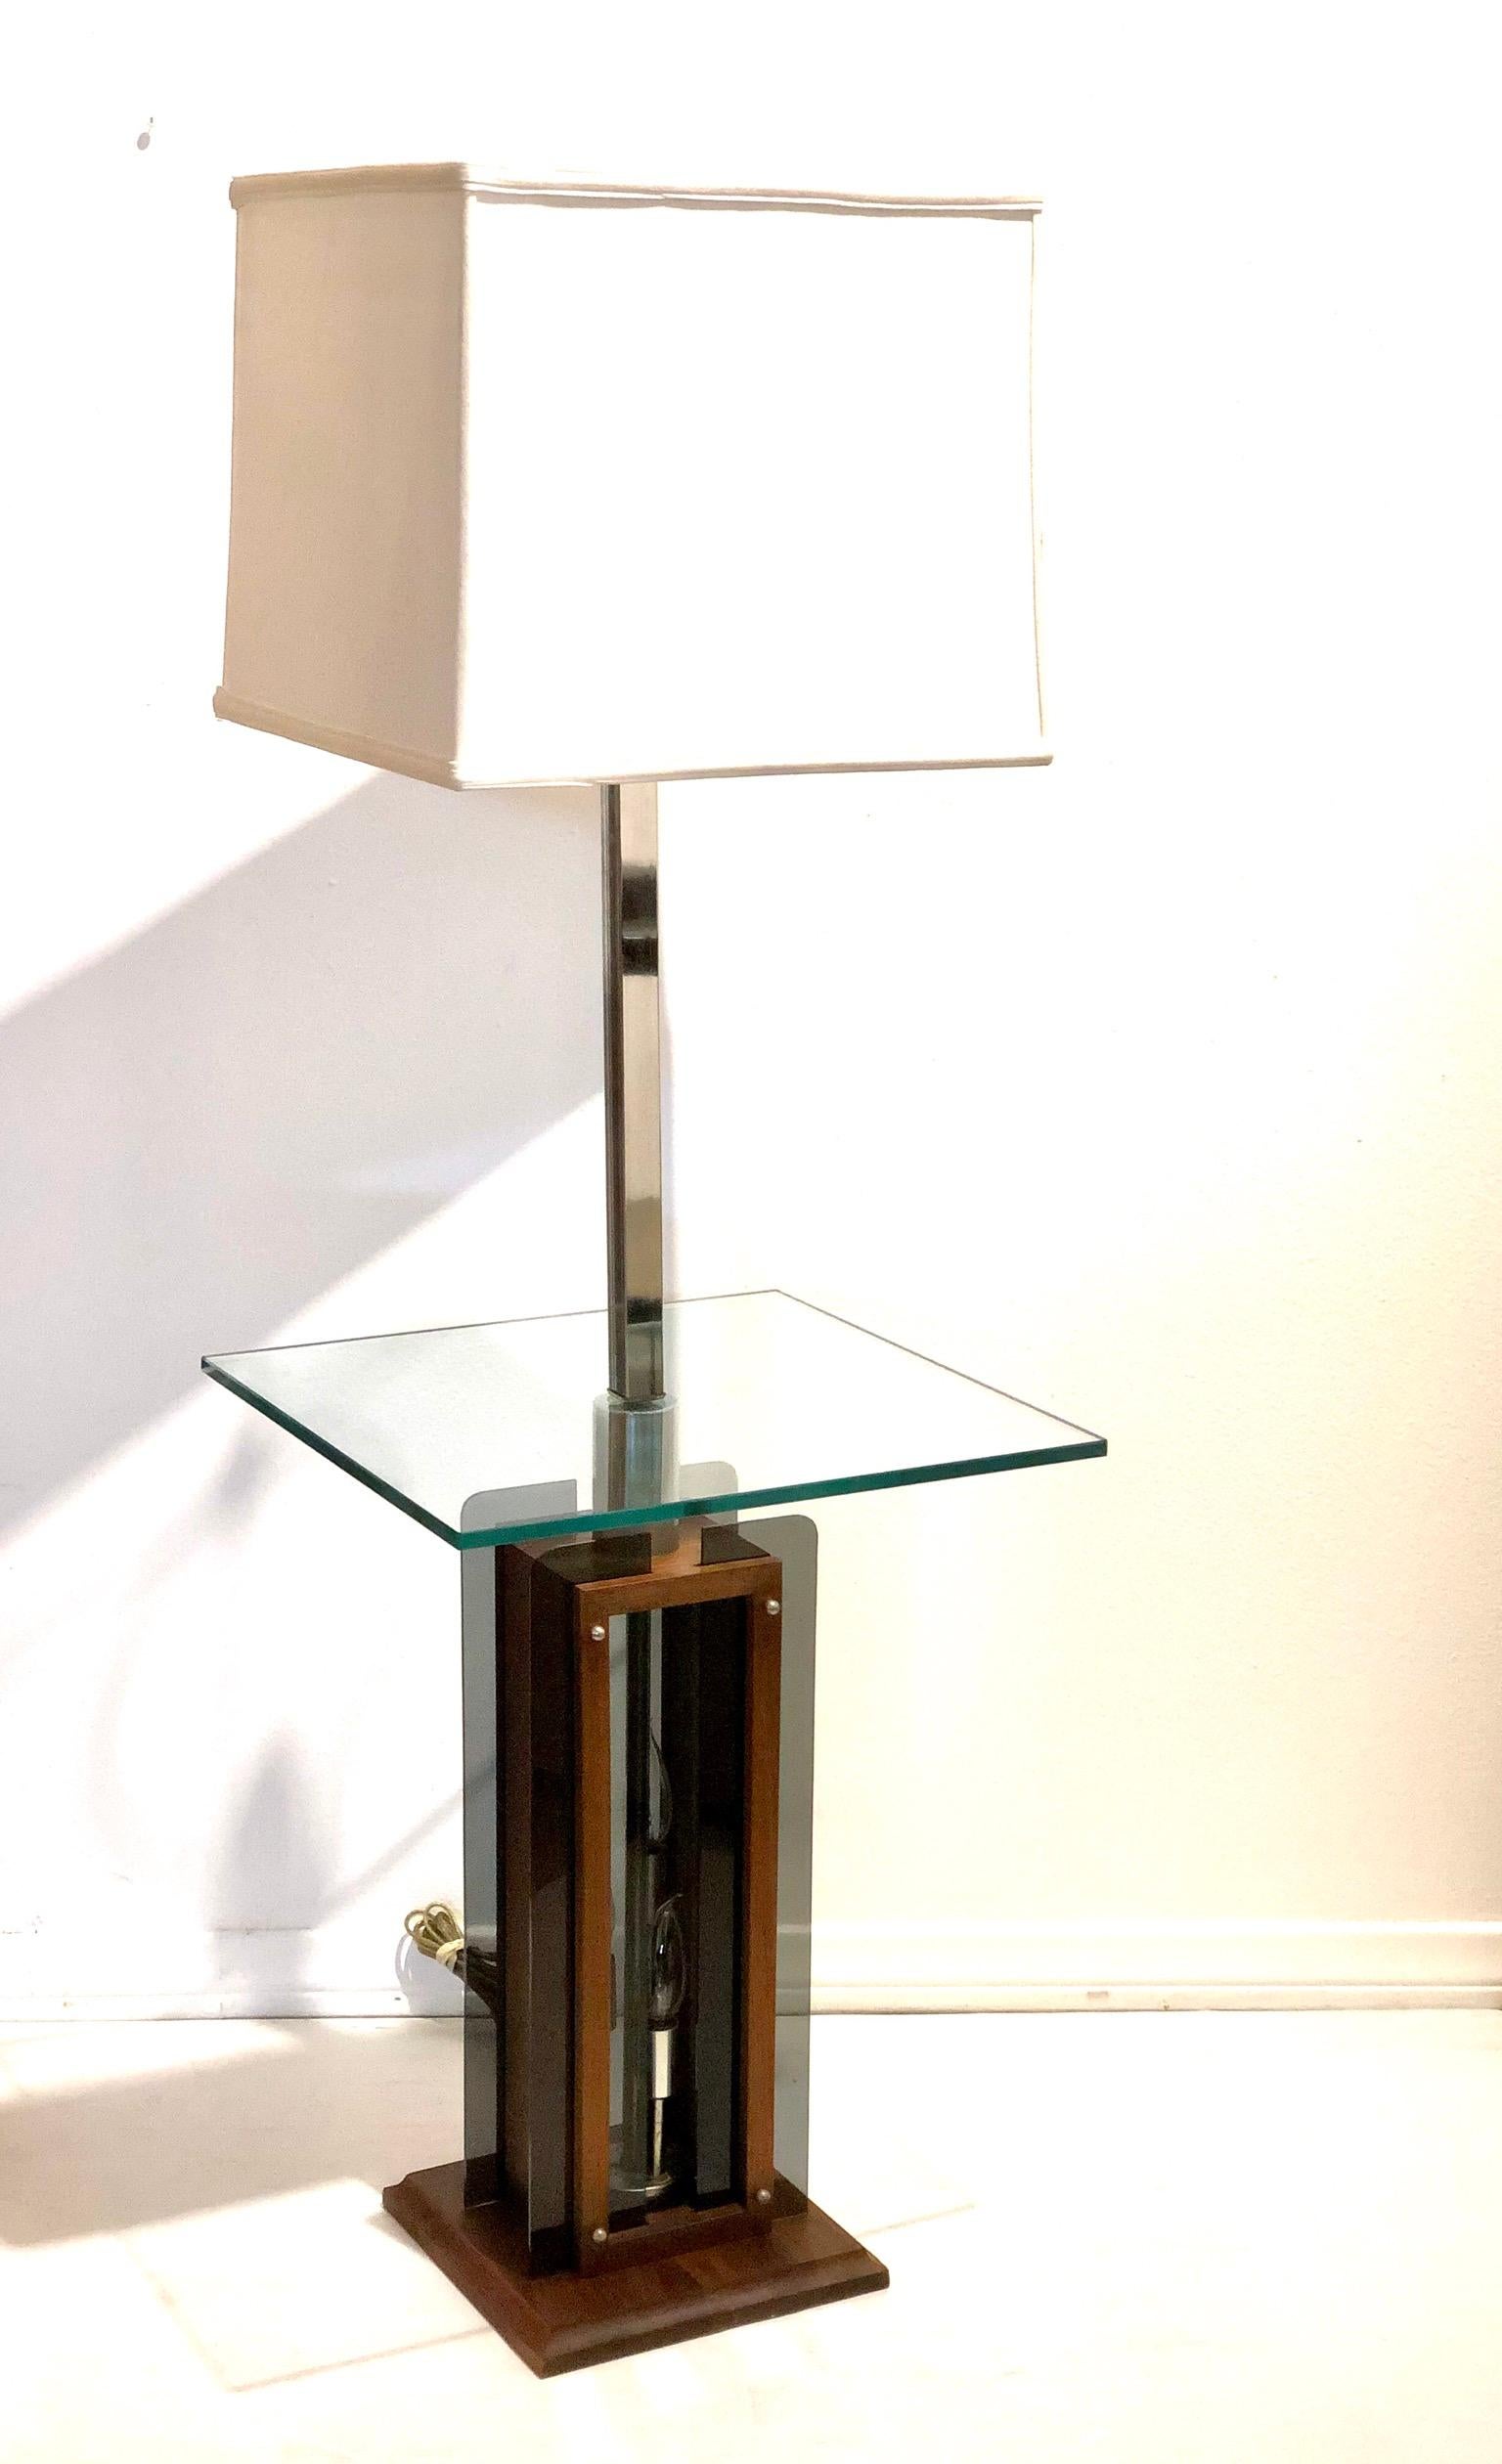 A rare California design table lamp circa 1970s in great condition, a solid walnut base that lights up with smoke Lucite accents, and chrome fittings we have to take it apart and clean it, oil it and rewire it. The lamp its 48